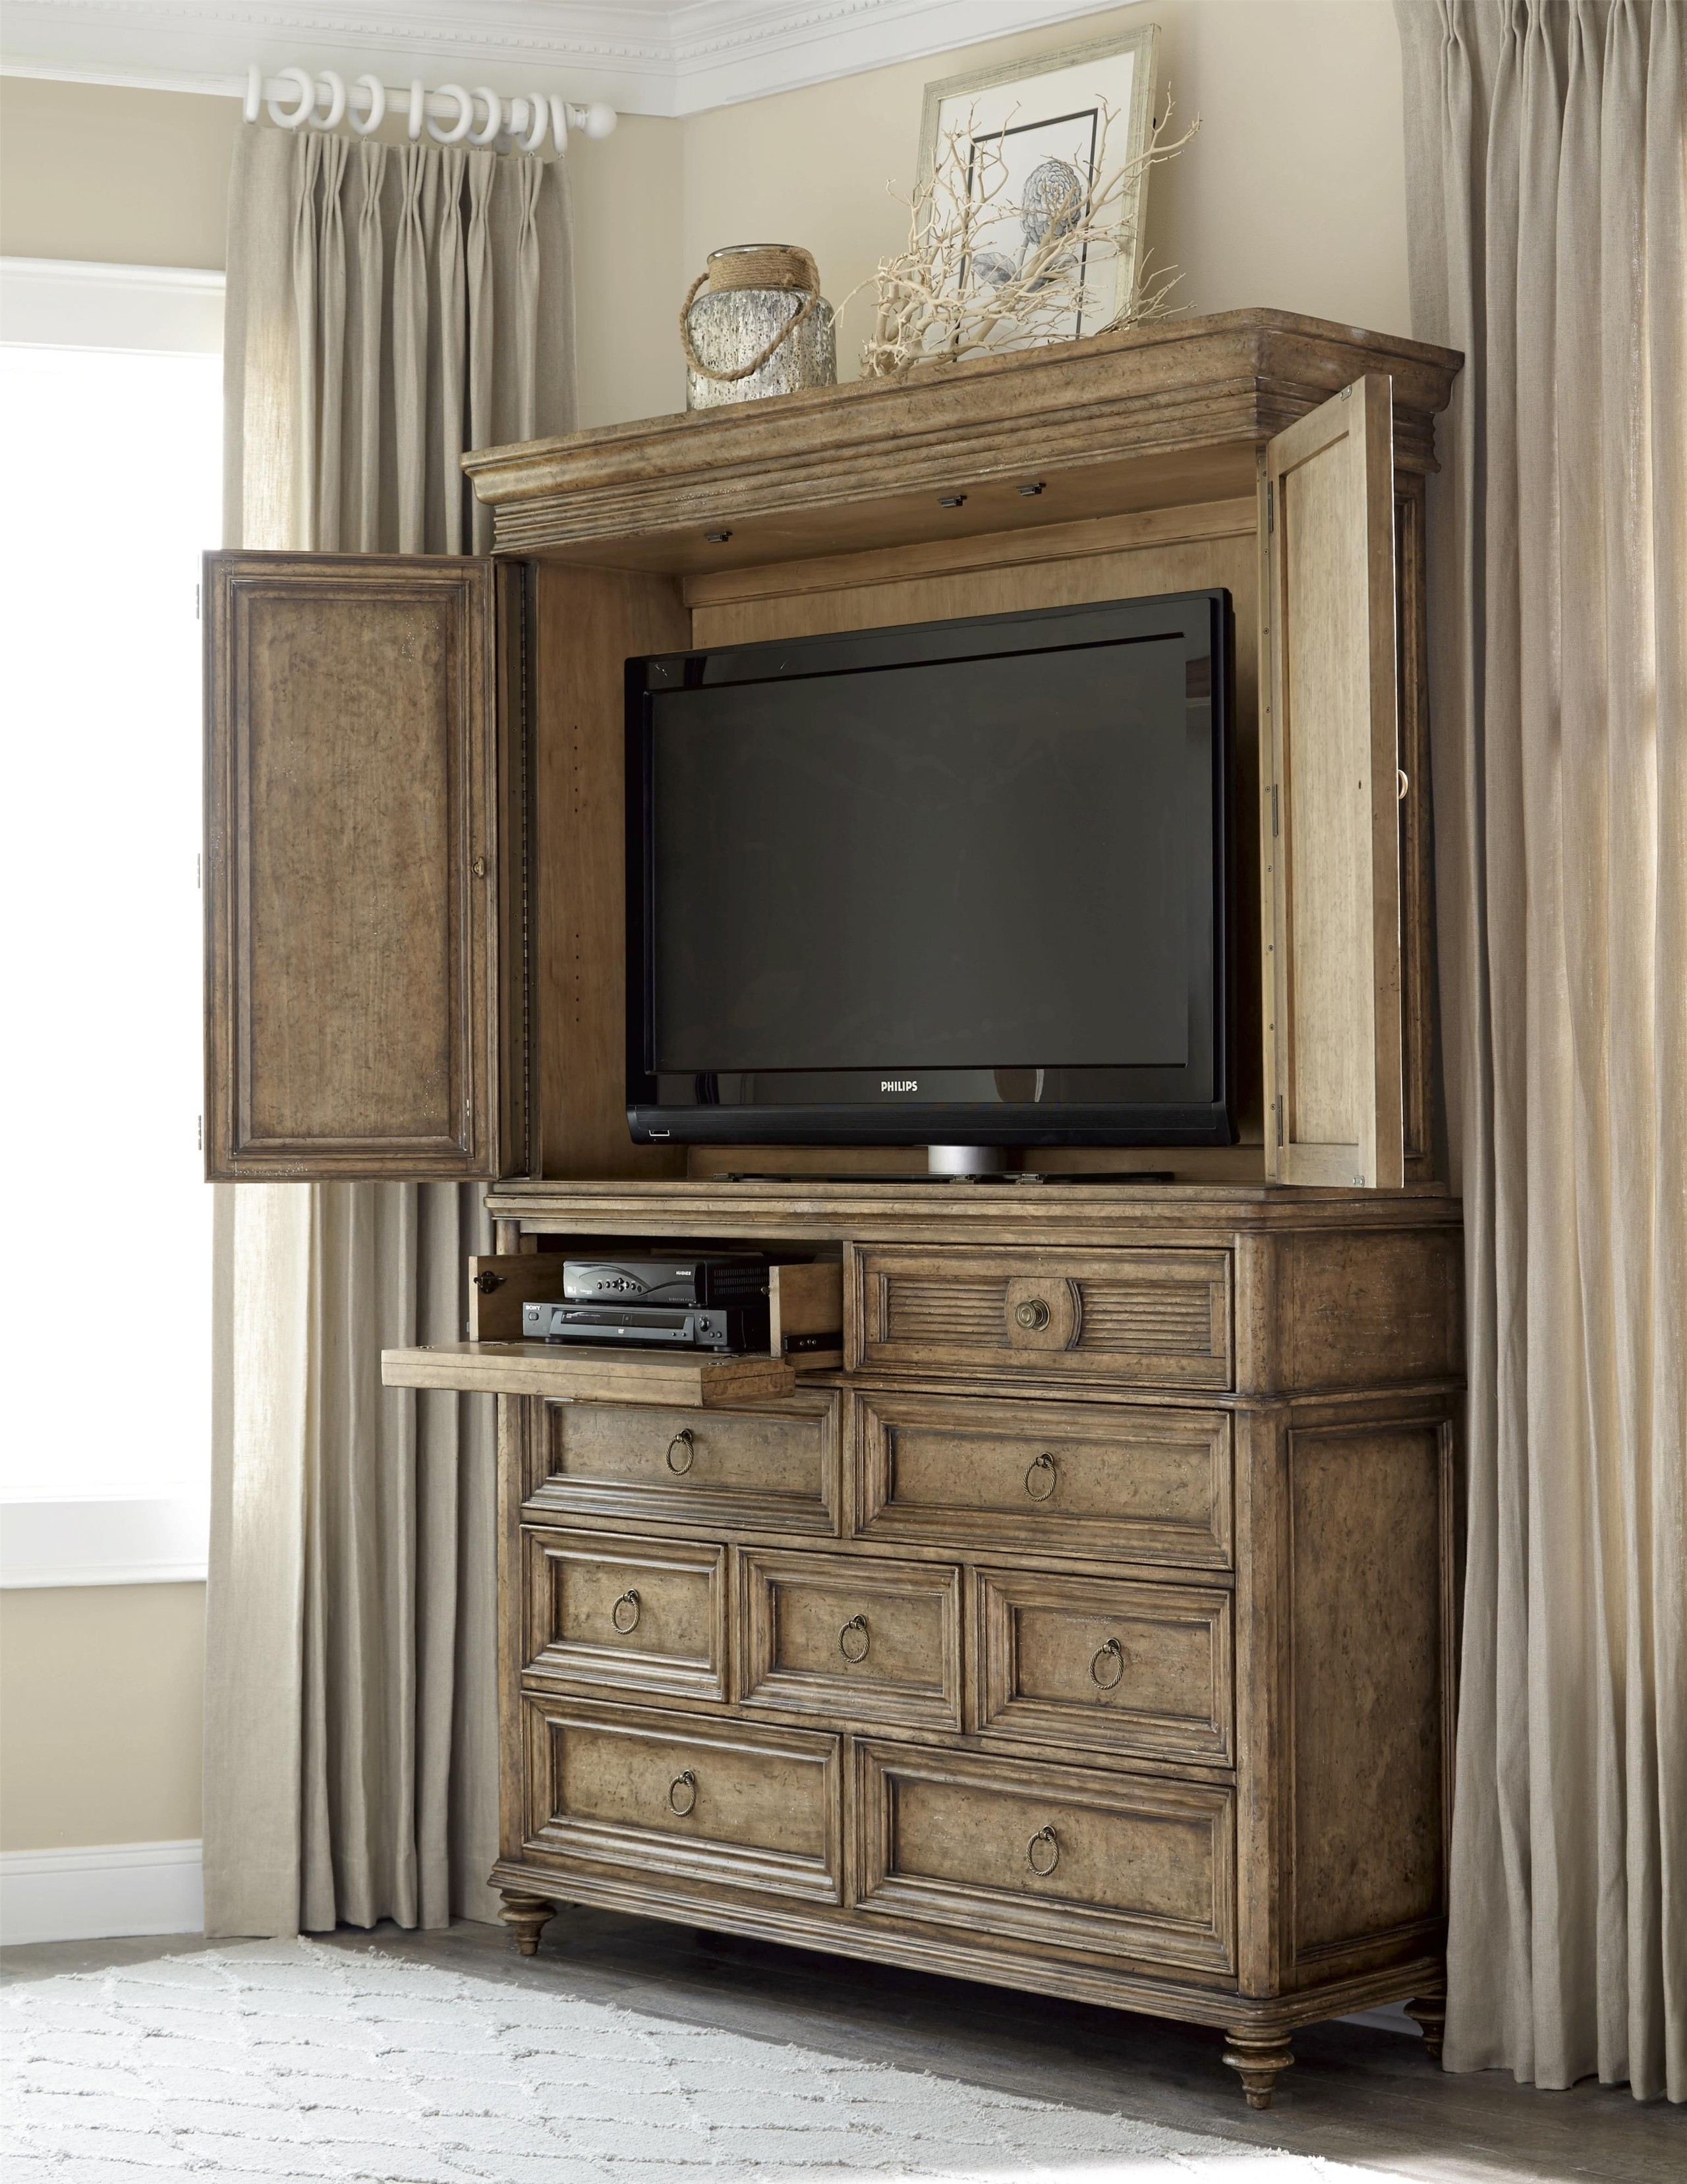 This grand armoire offers great style and function to a